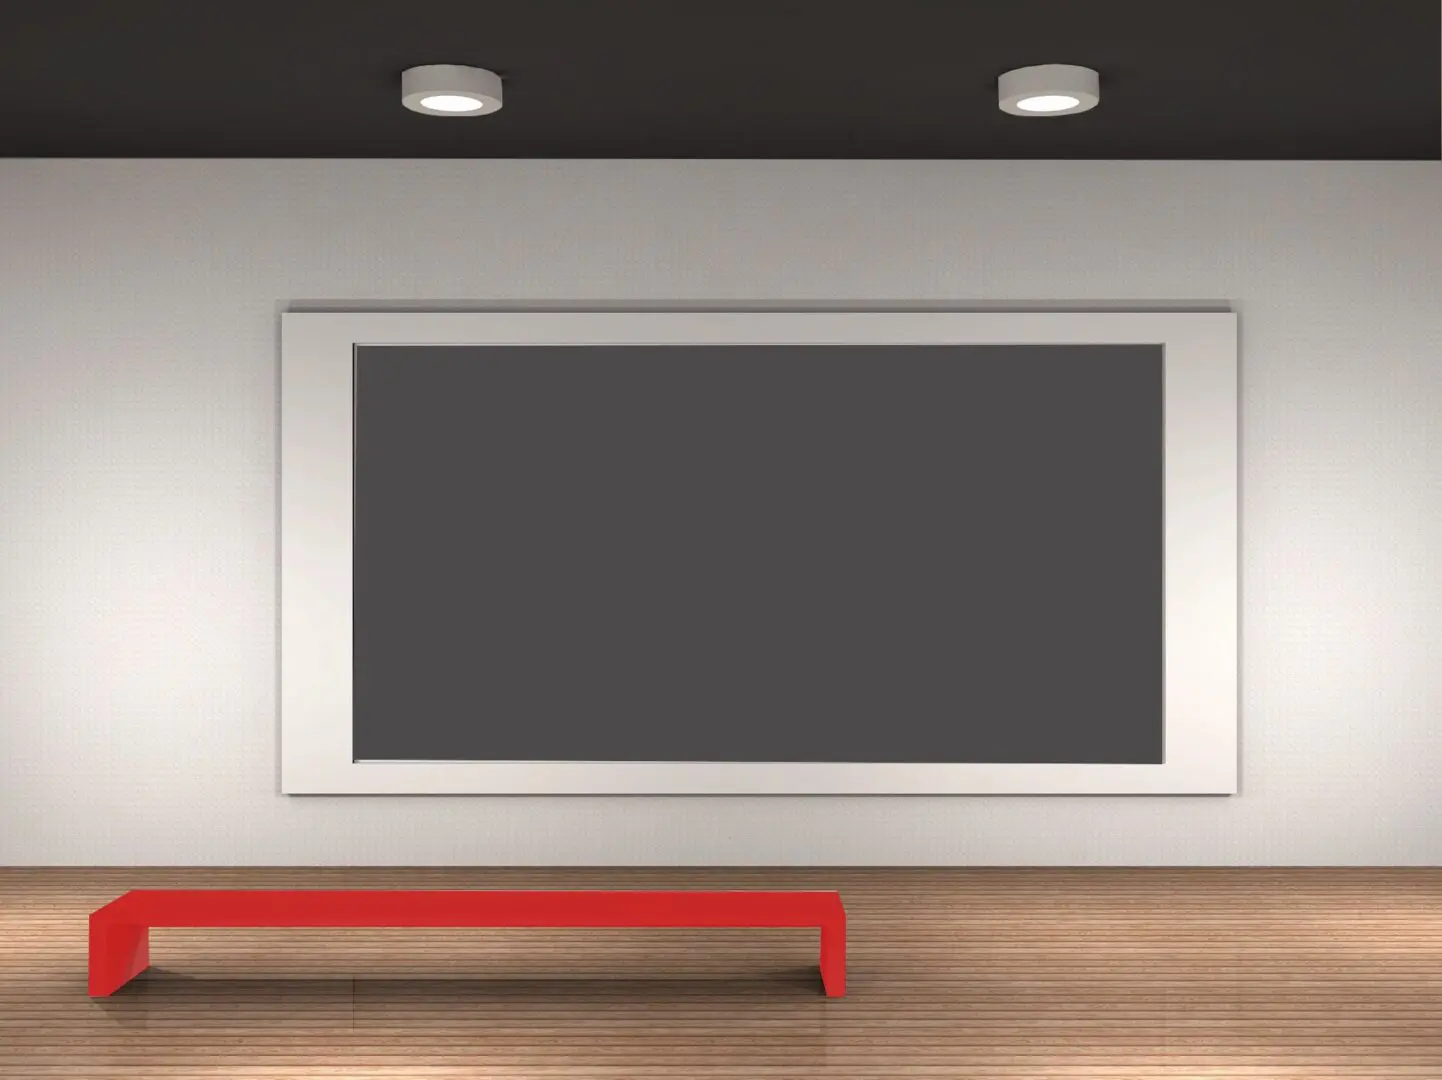 A large tv screen in the middle of a room.